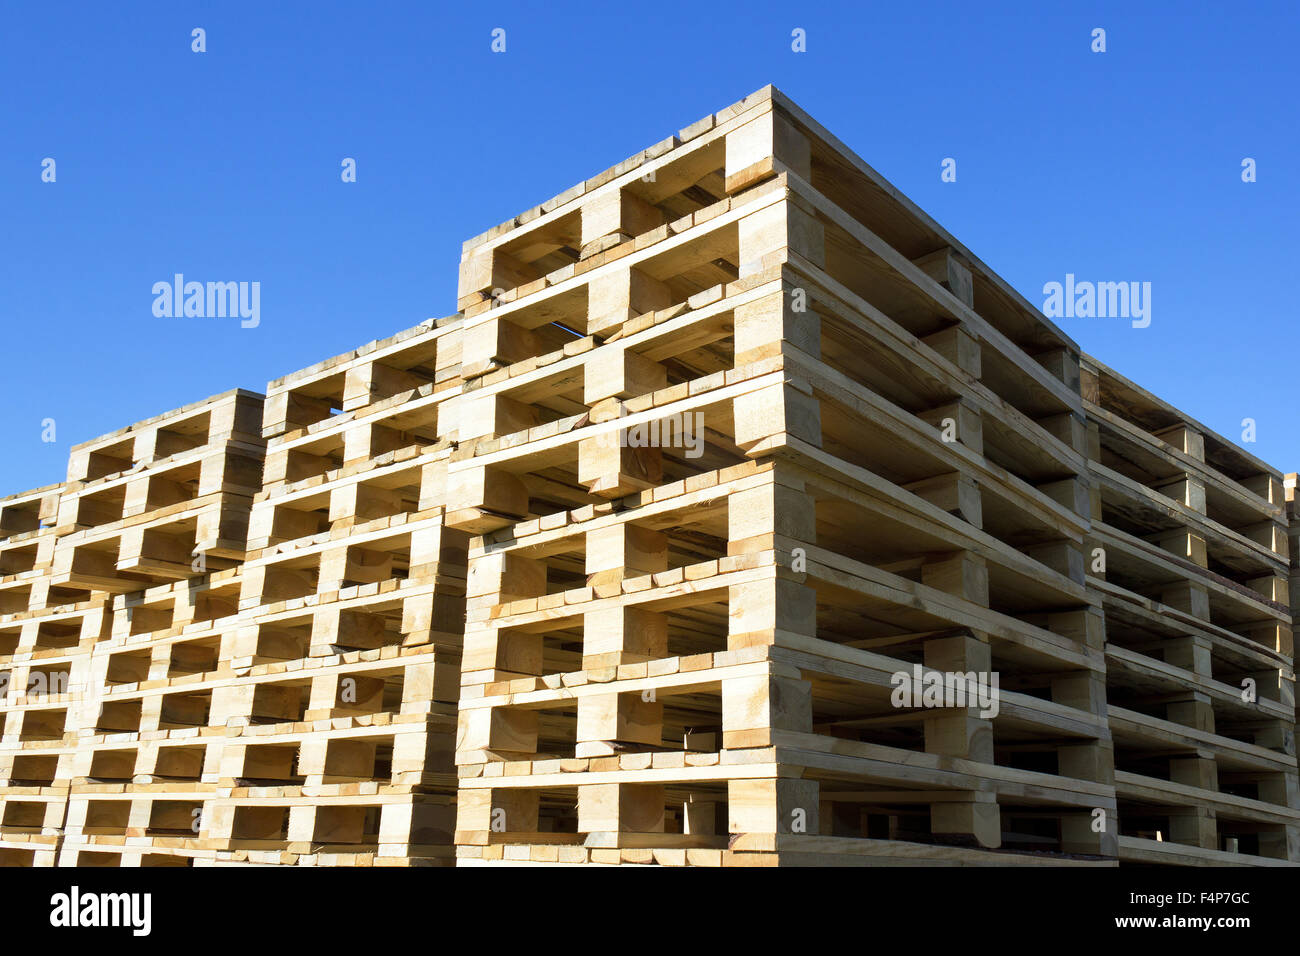 wooden pallets Stock Photo